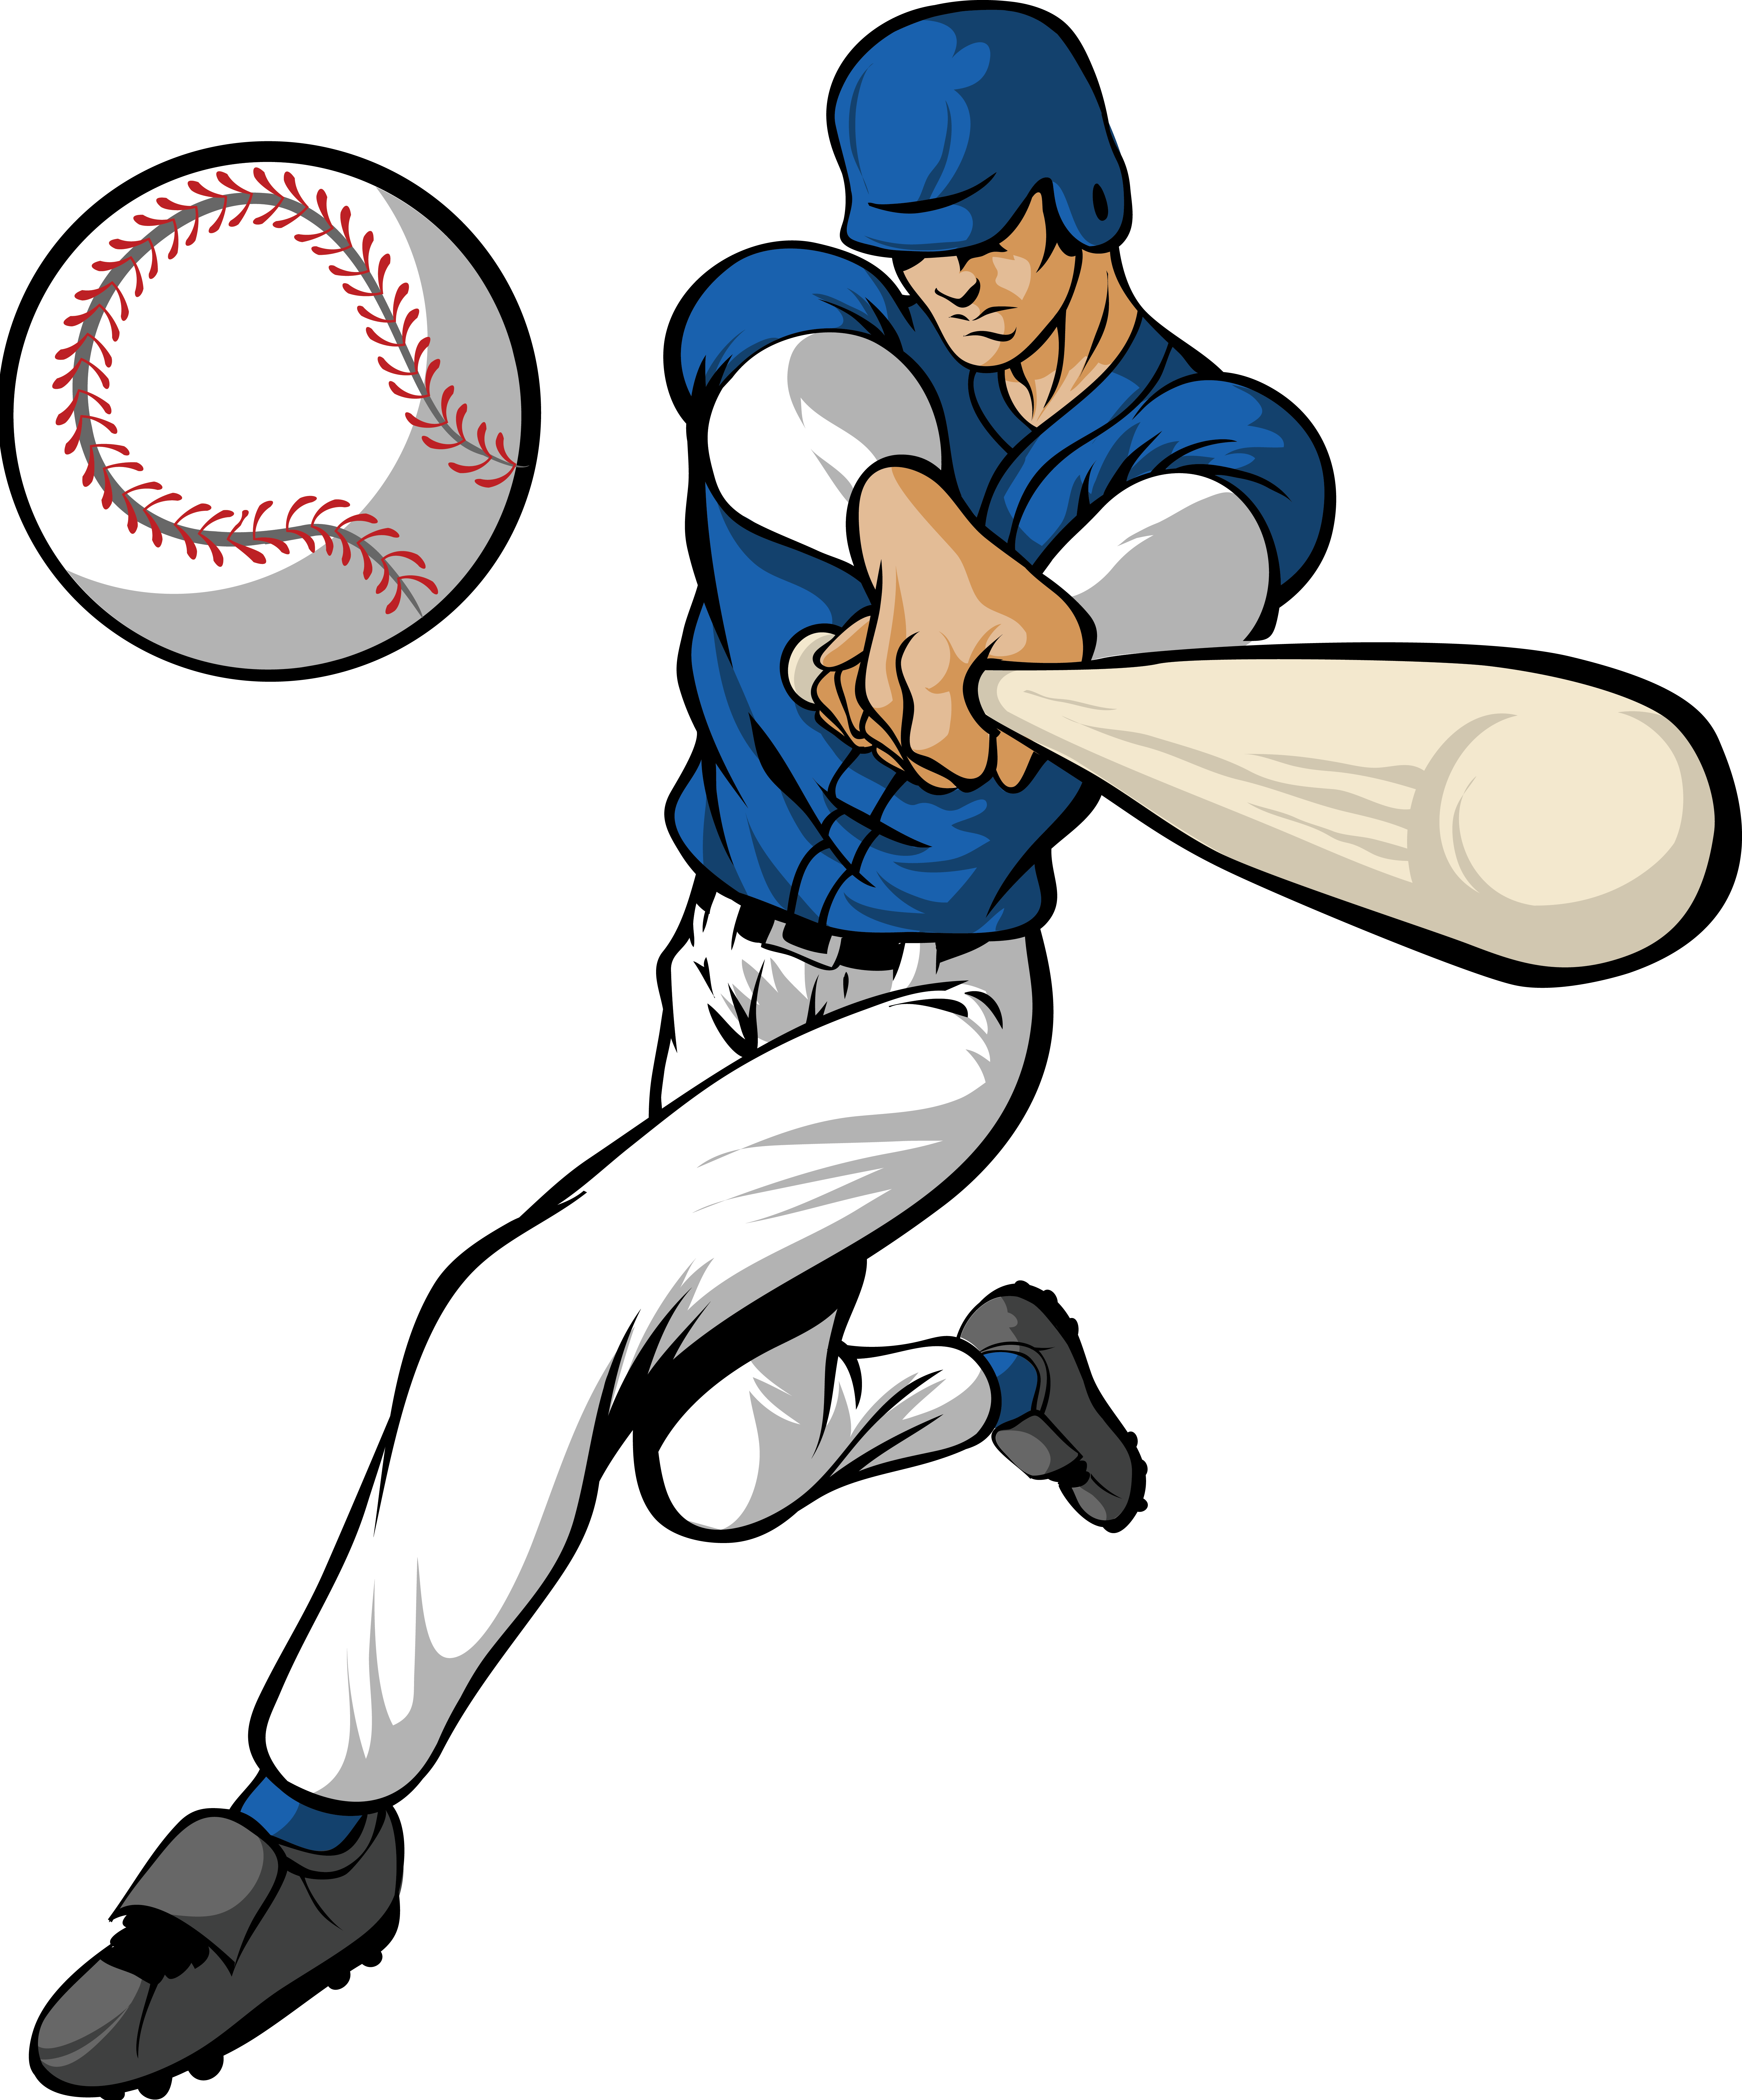 Cartoon Baseball Player With Glove | Free Download Clip Art | Free ...